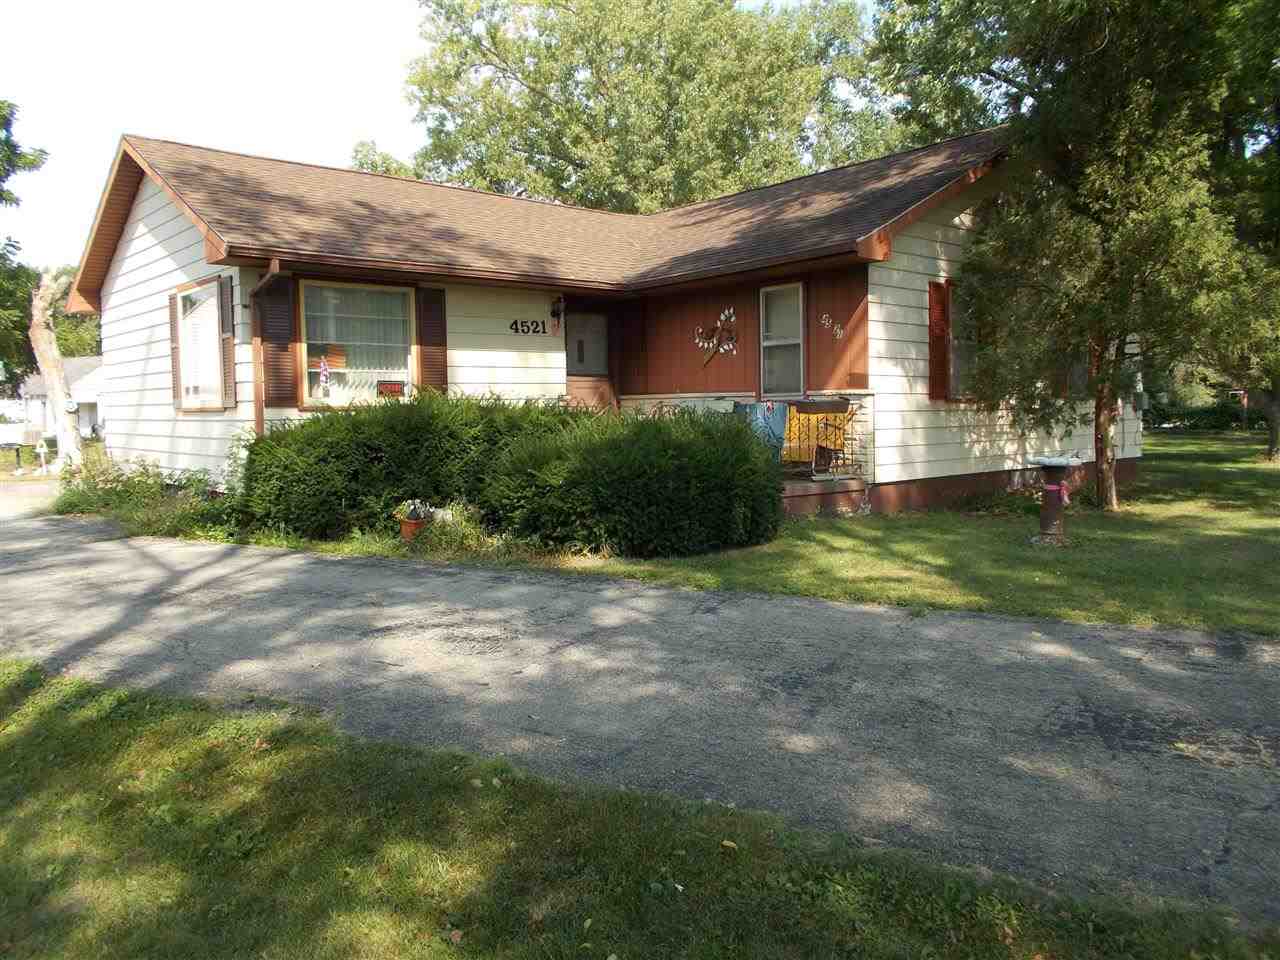  4521 Lafayette Rd, Evansdale, IA photo